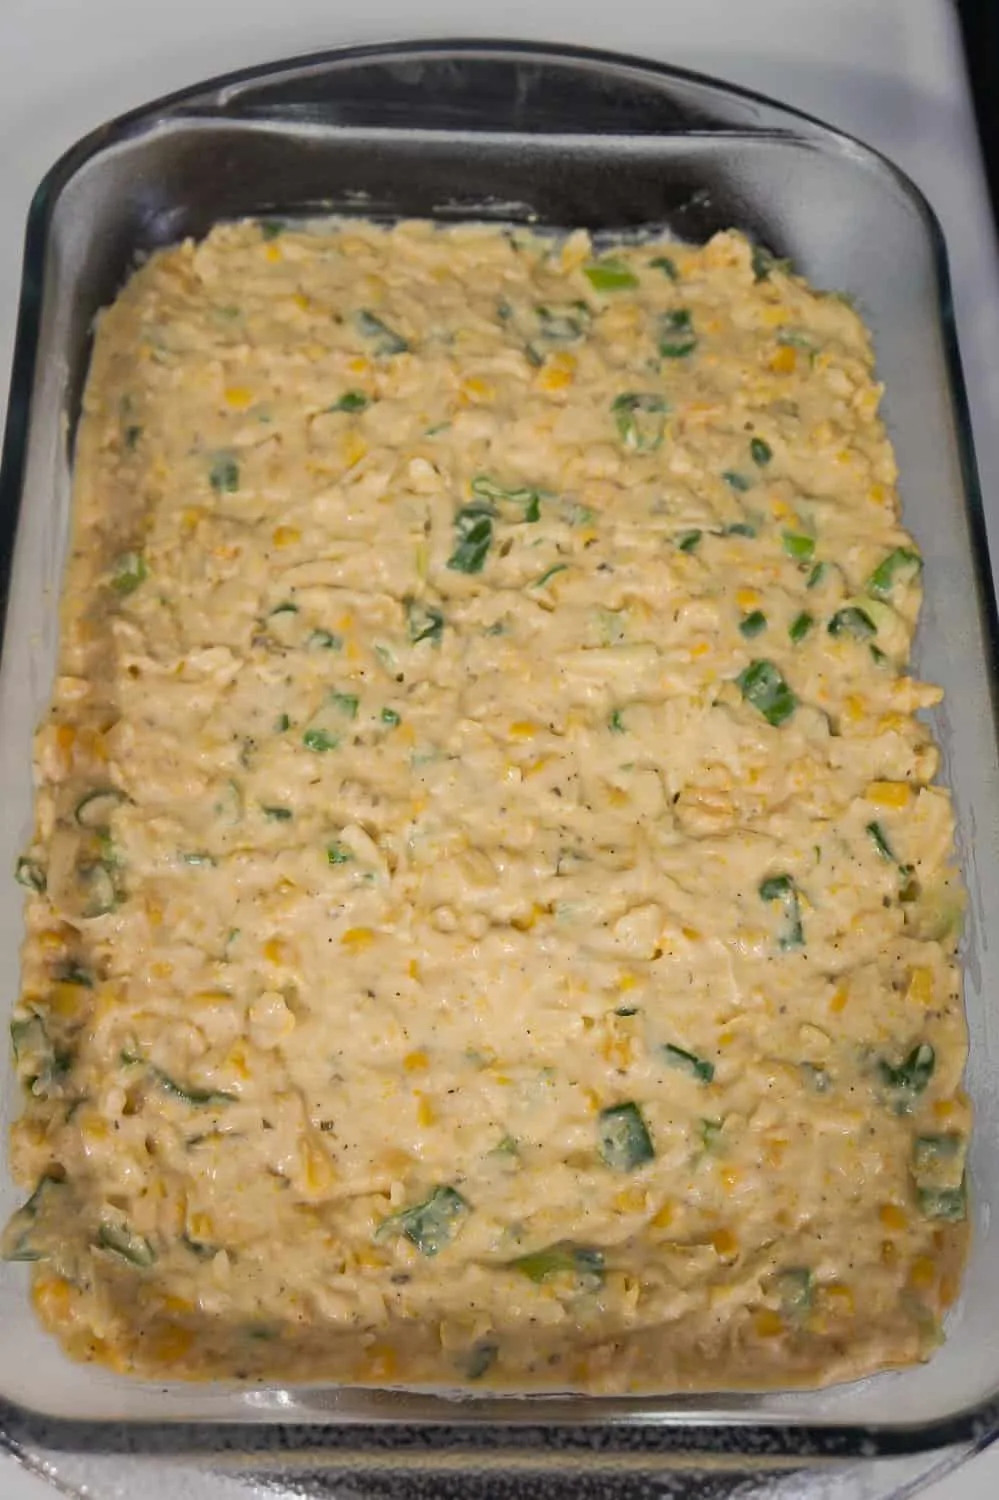 uncooked corn casserole mixture in a baking dish